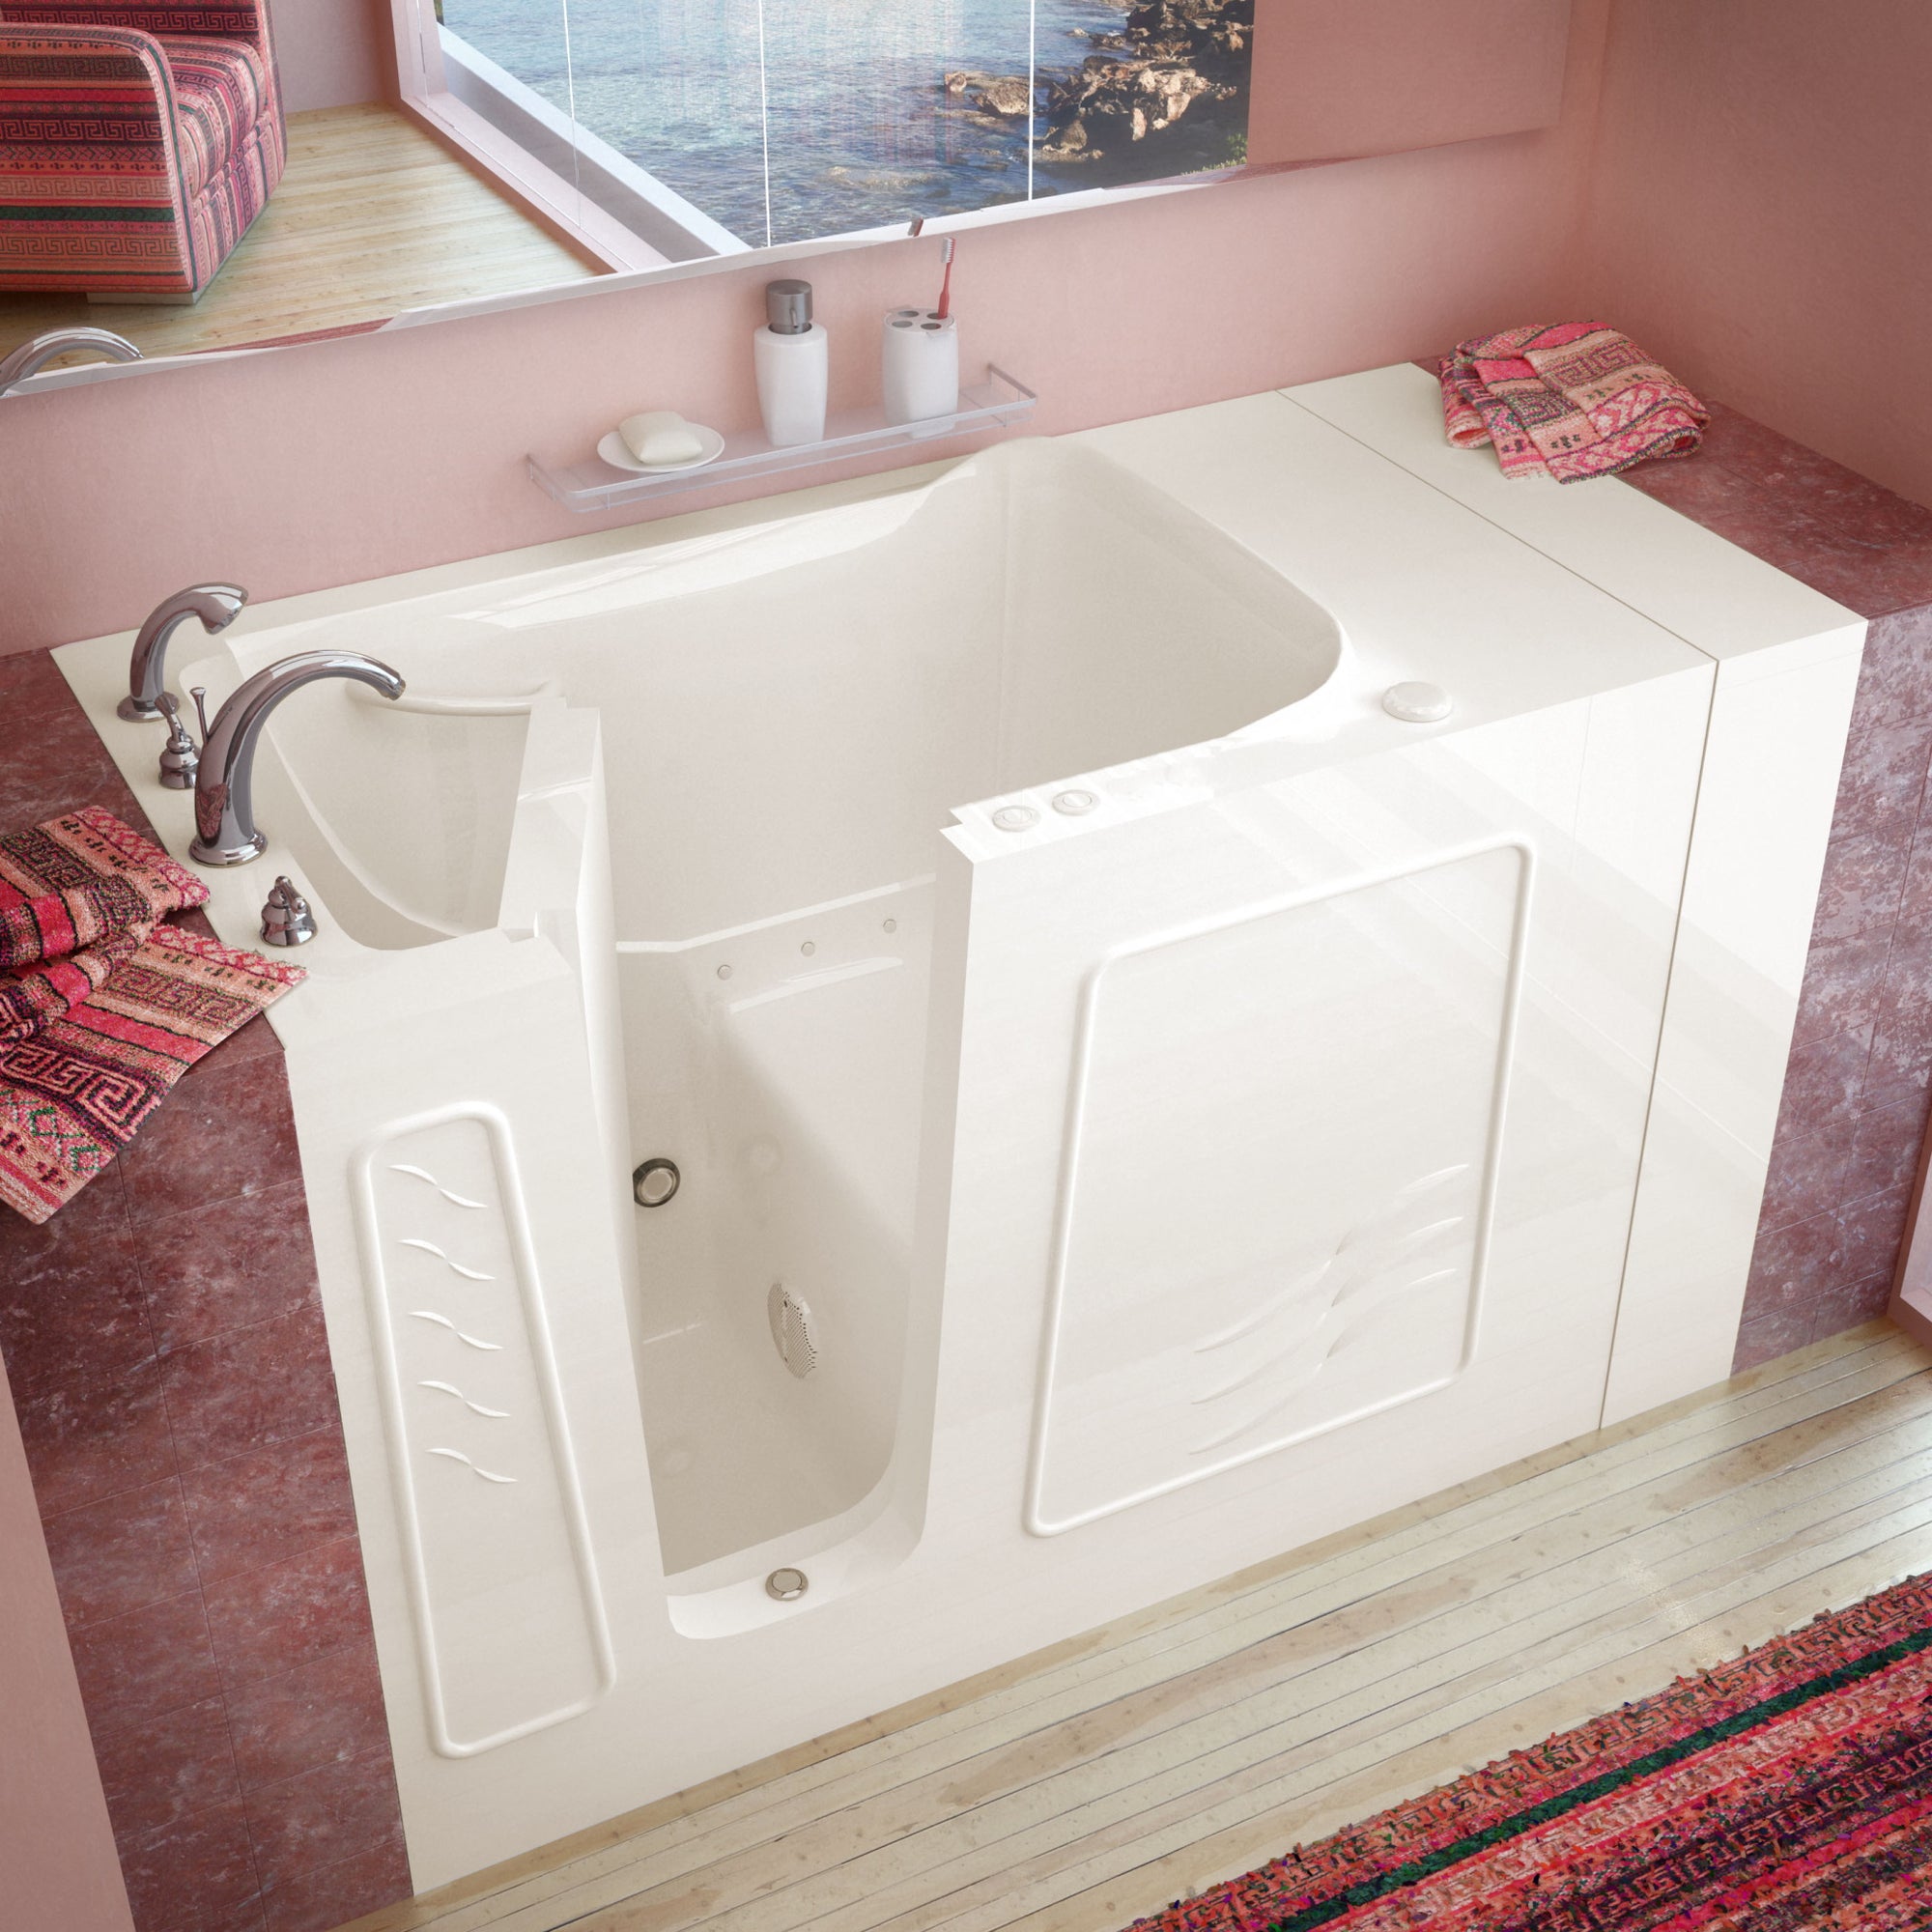 Meditub 30 x 53 Walk-In Bathtub - High-grade marine fiberglass with triple gel coating - Biscuit finish and color matching trim - Inward swinging door - Left side drain - with 6 in. Threshold & 17 in. Seat Height, built-in grab bar - Air Jetted - Lifestyle - 3053 - Vital Hydrotherapy